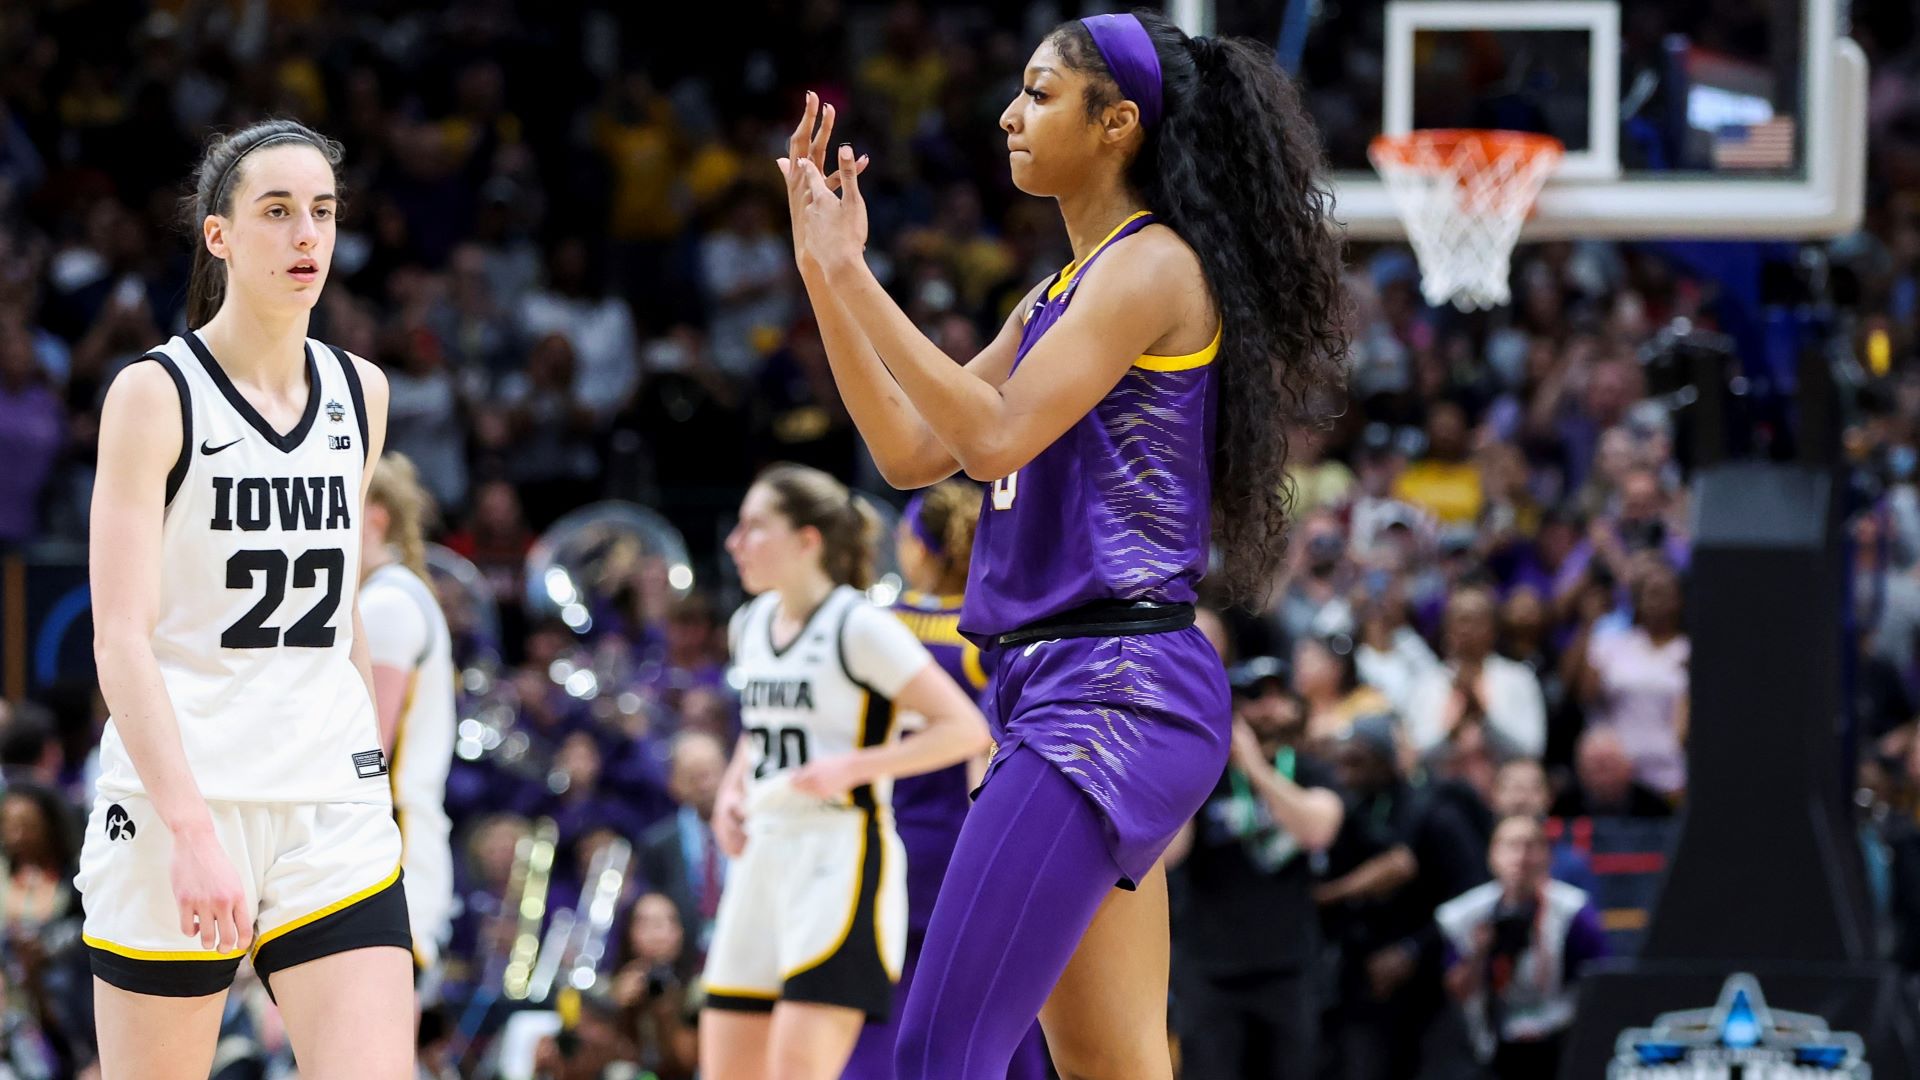 LSU's Angel Reese Explains Why She Taunted Iowa's Caitlin Clark